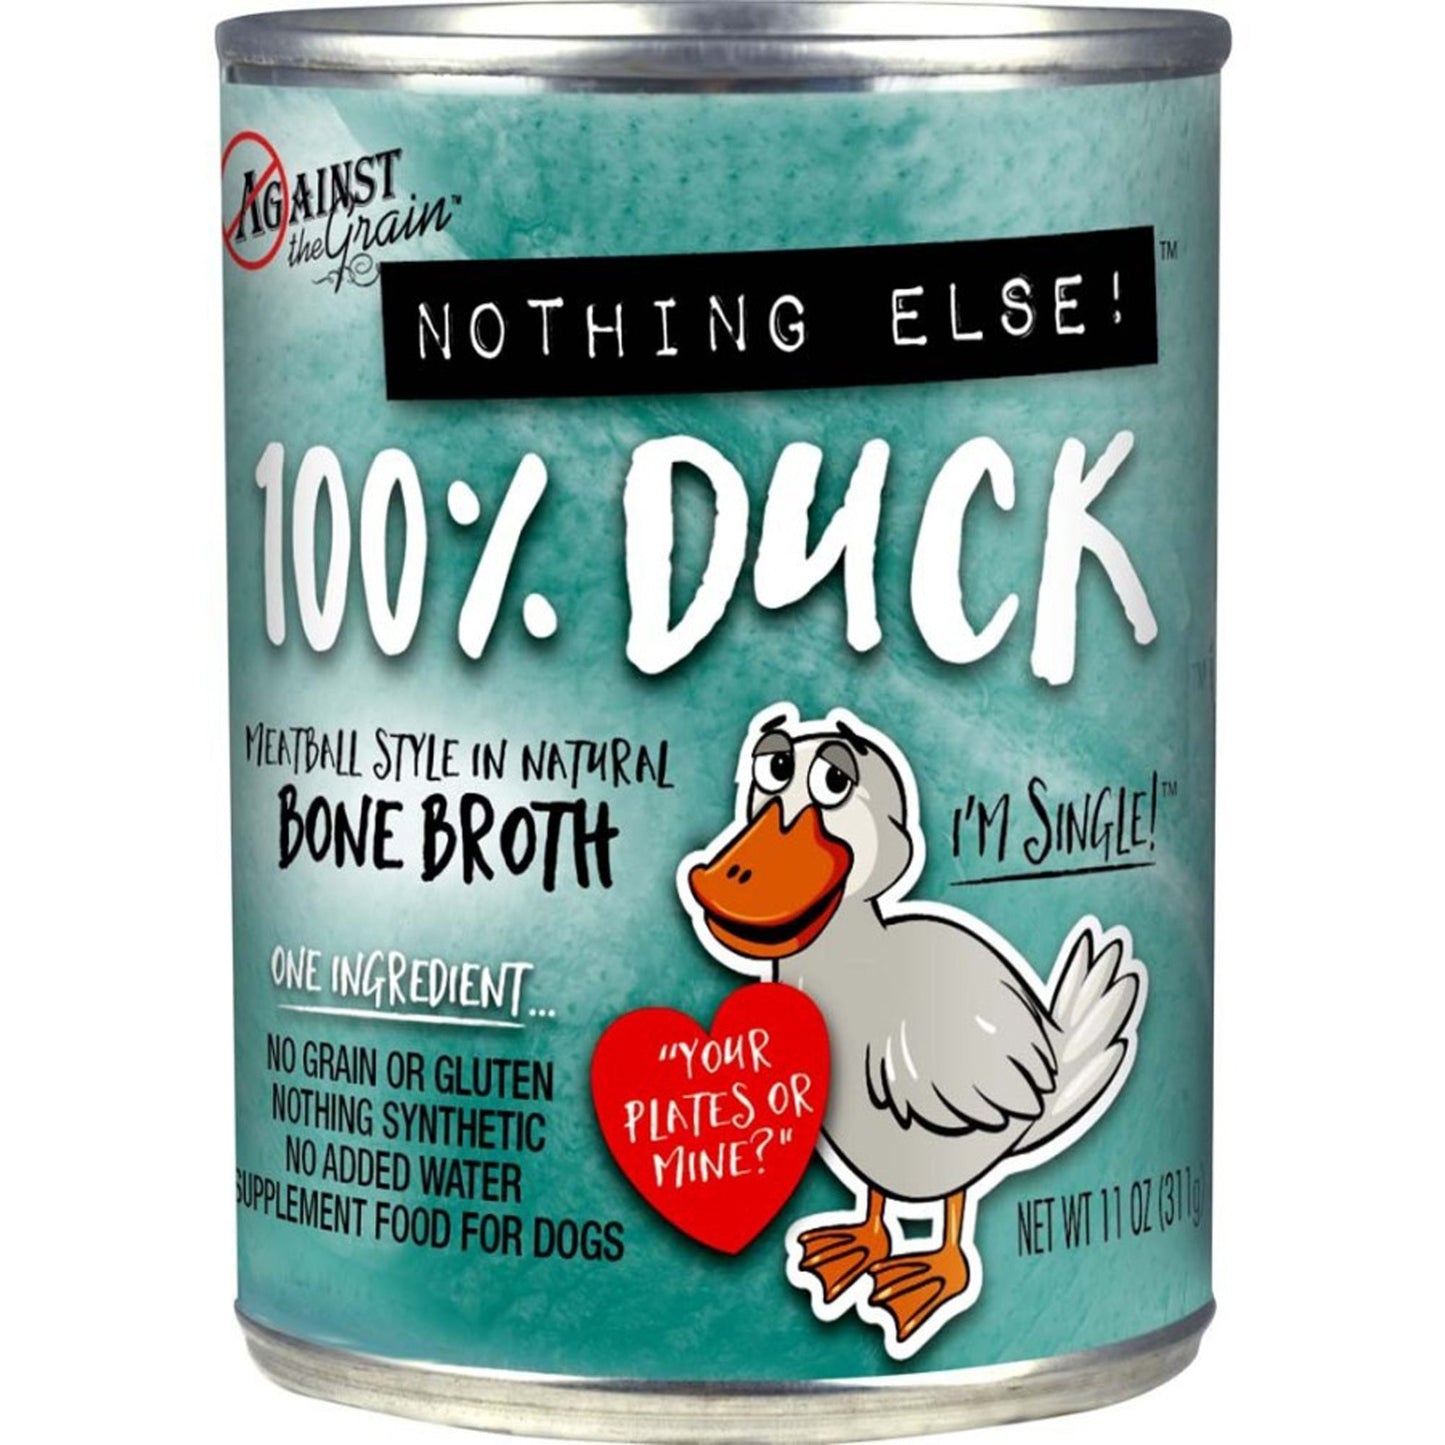 Against the Grain Nothing Else 100% One Ingredient Adult Wet Dog Food Duck, 11oz. (Case of 12)